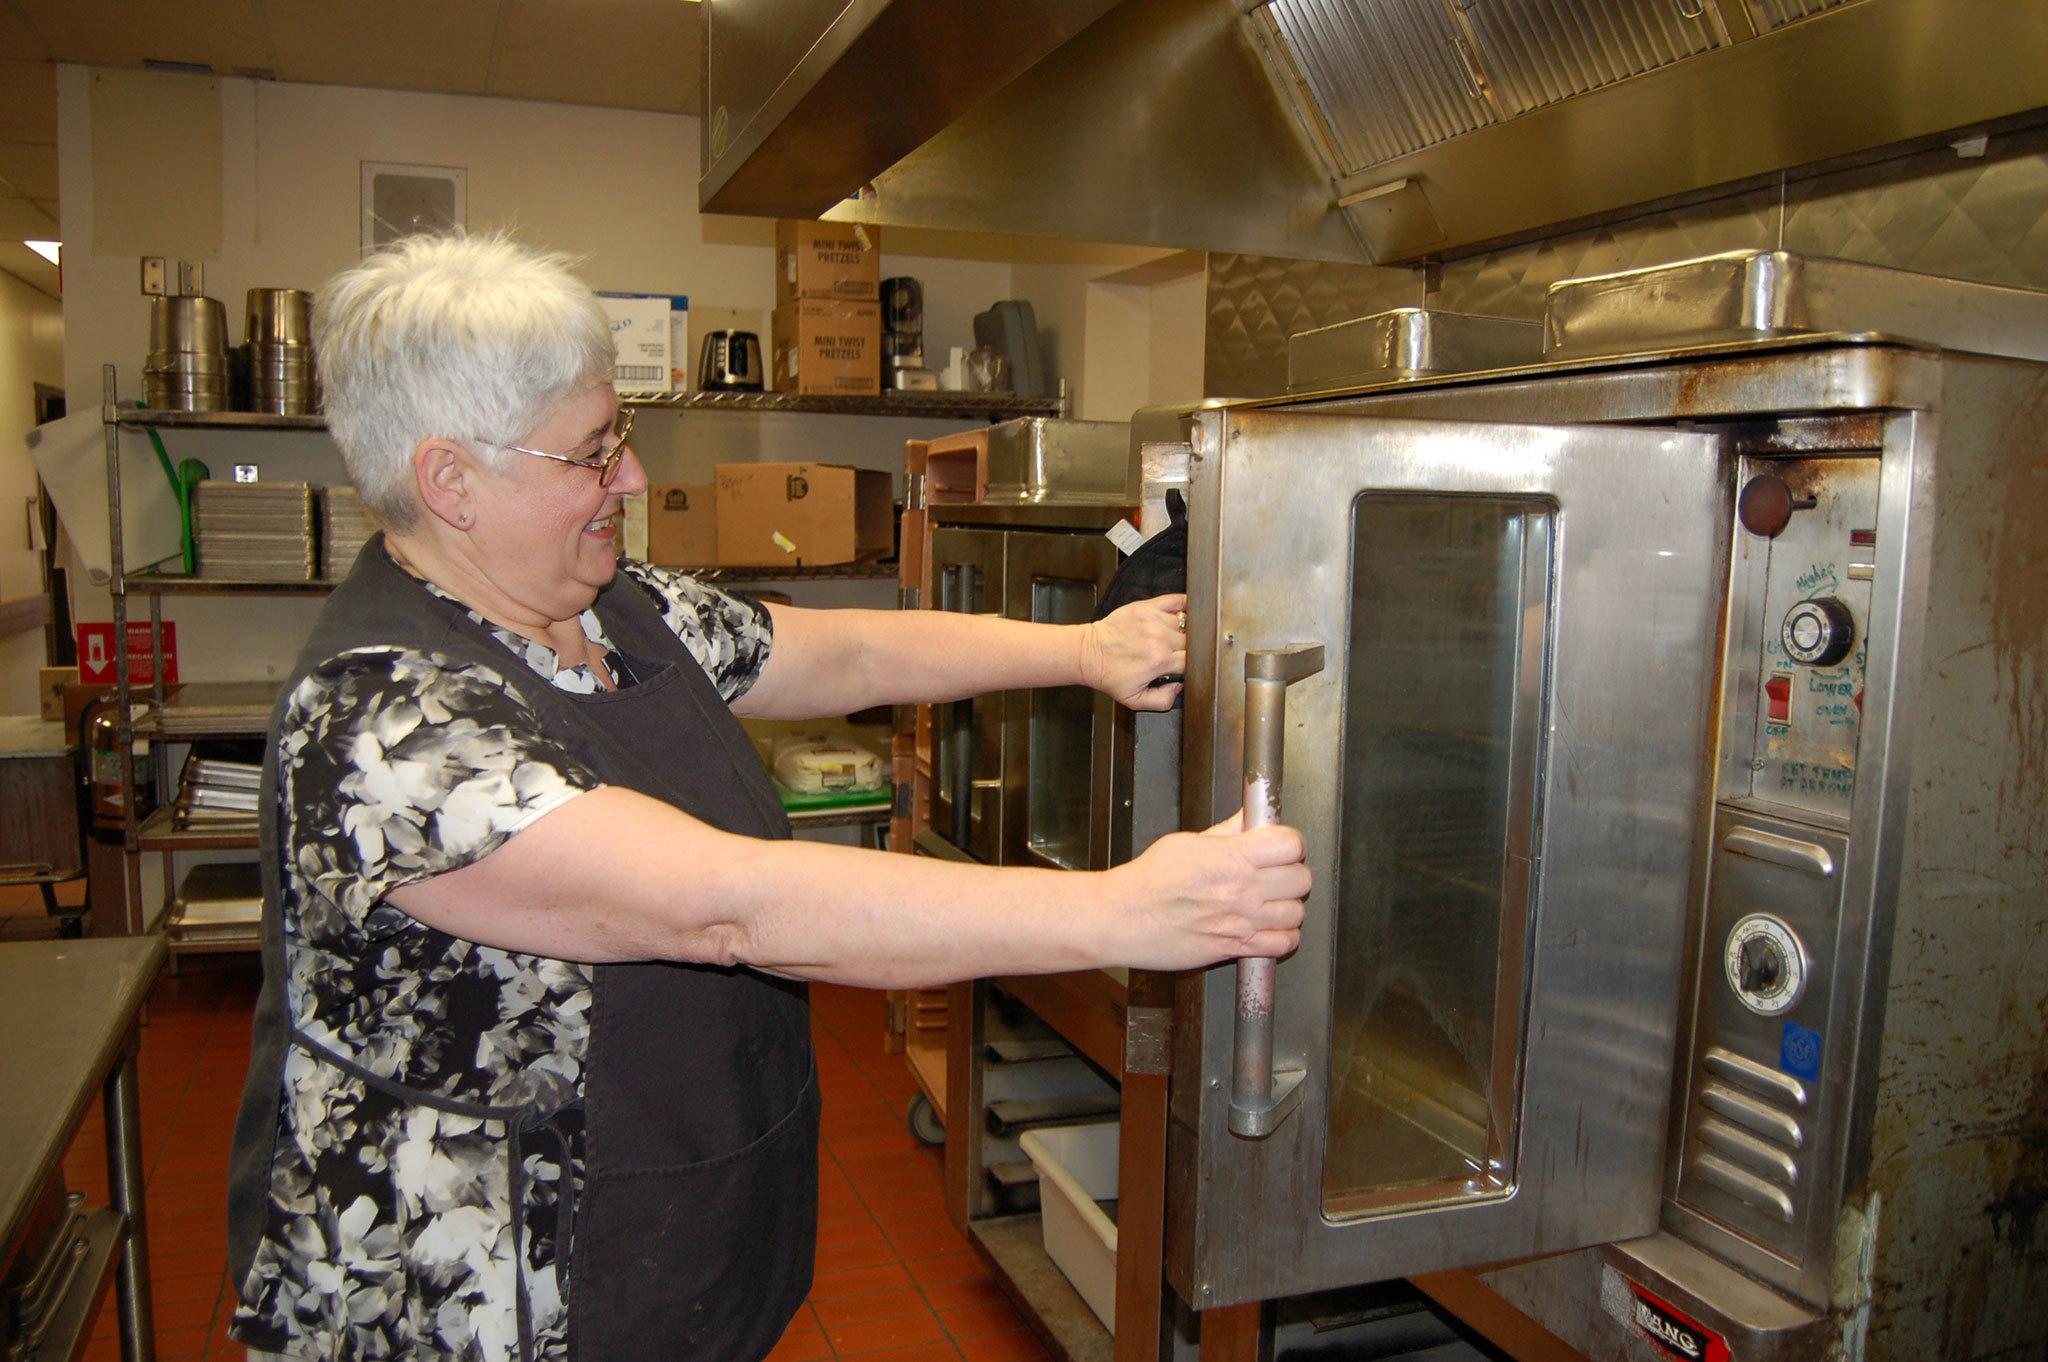 Laurie Campen, director of food services at the Sequim School District kitchen, opens an oven from the 1970s with only one door that opens. Sequim Gazette photo by Erin Hawkins